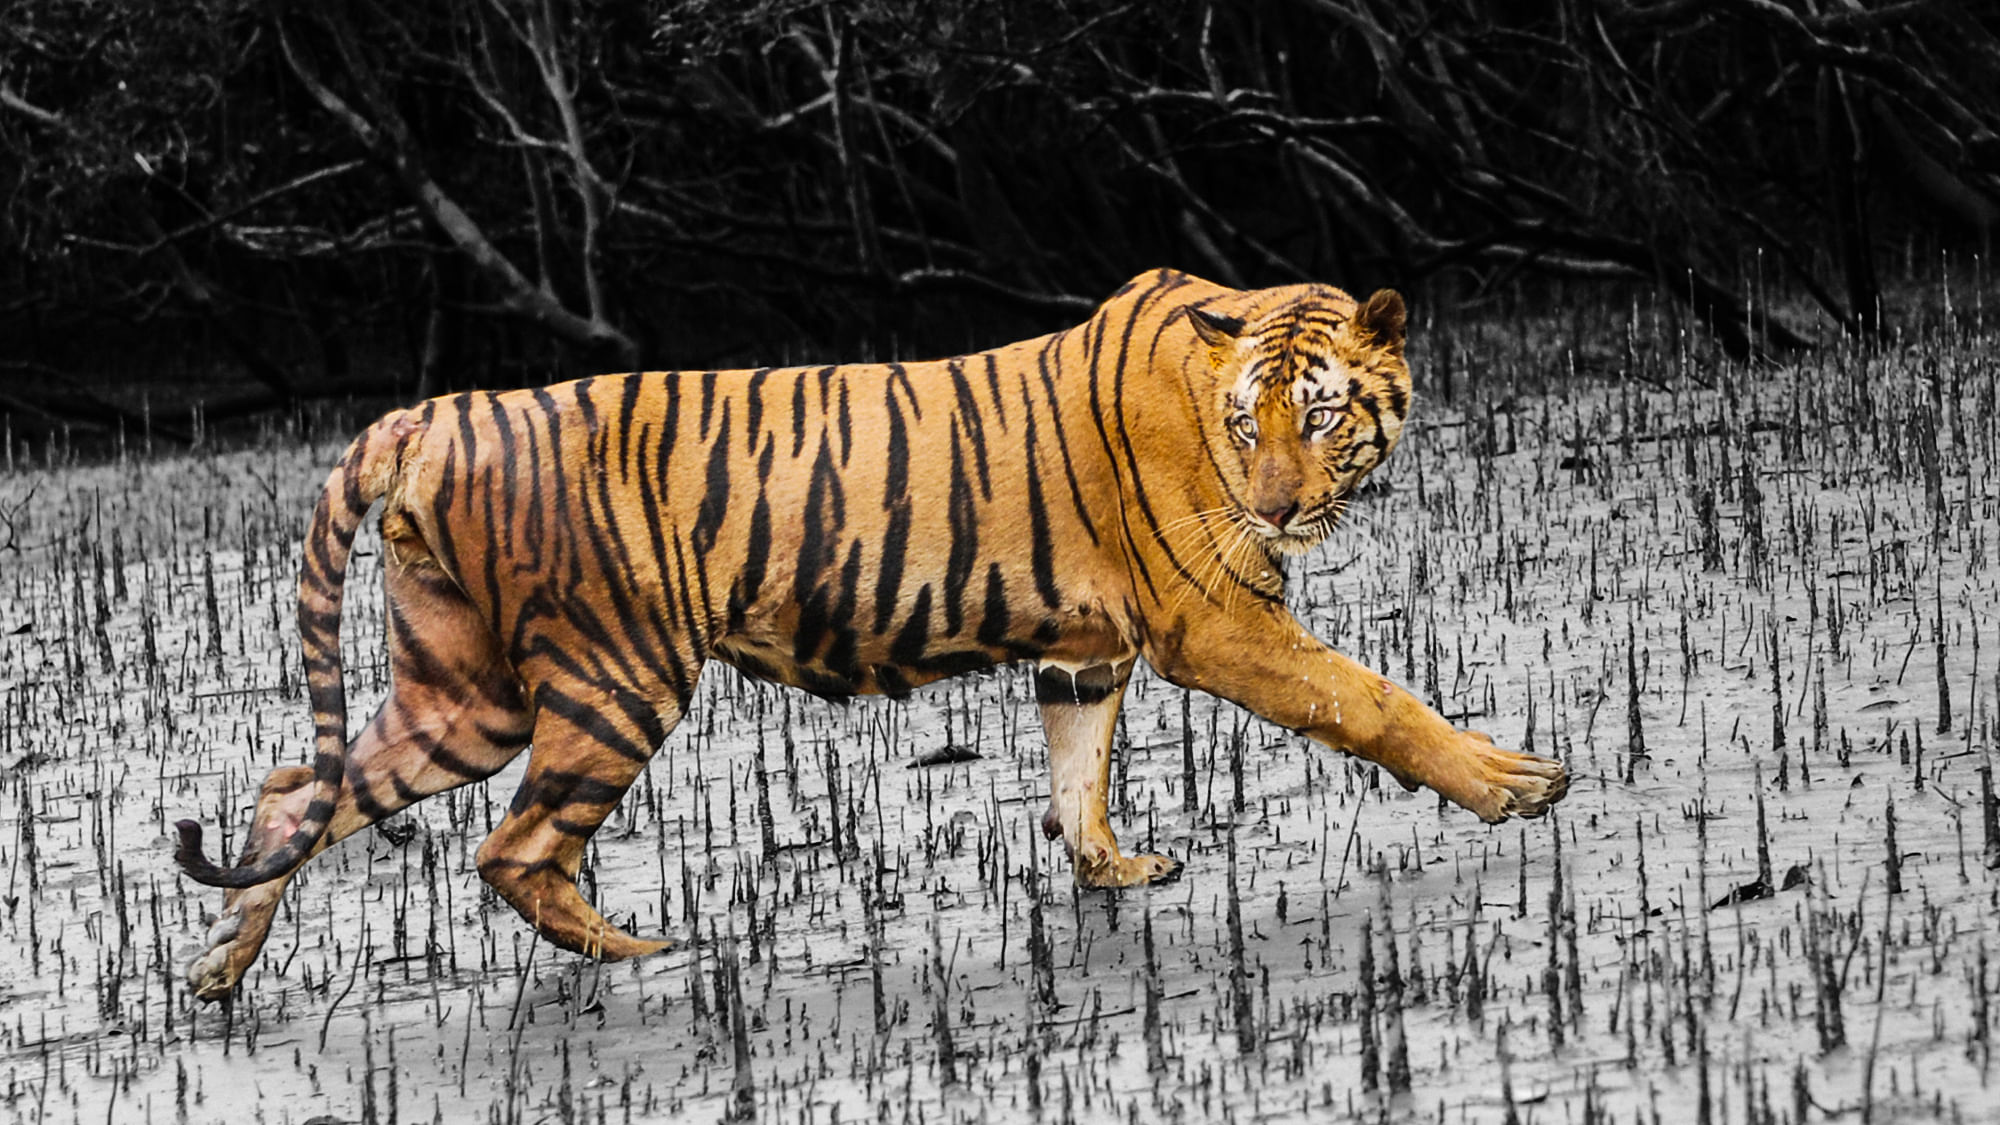 A tiger in the marshy terrain of the Sunderbans (Photo: NC Bahuguna/Image altered by <b>The Quint</b>)